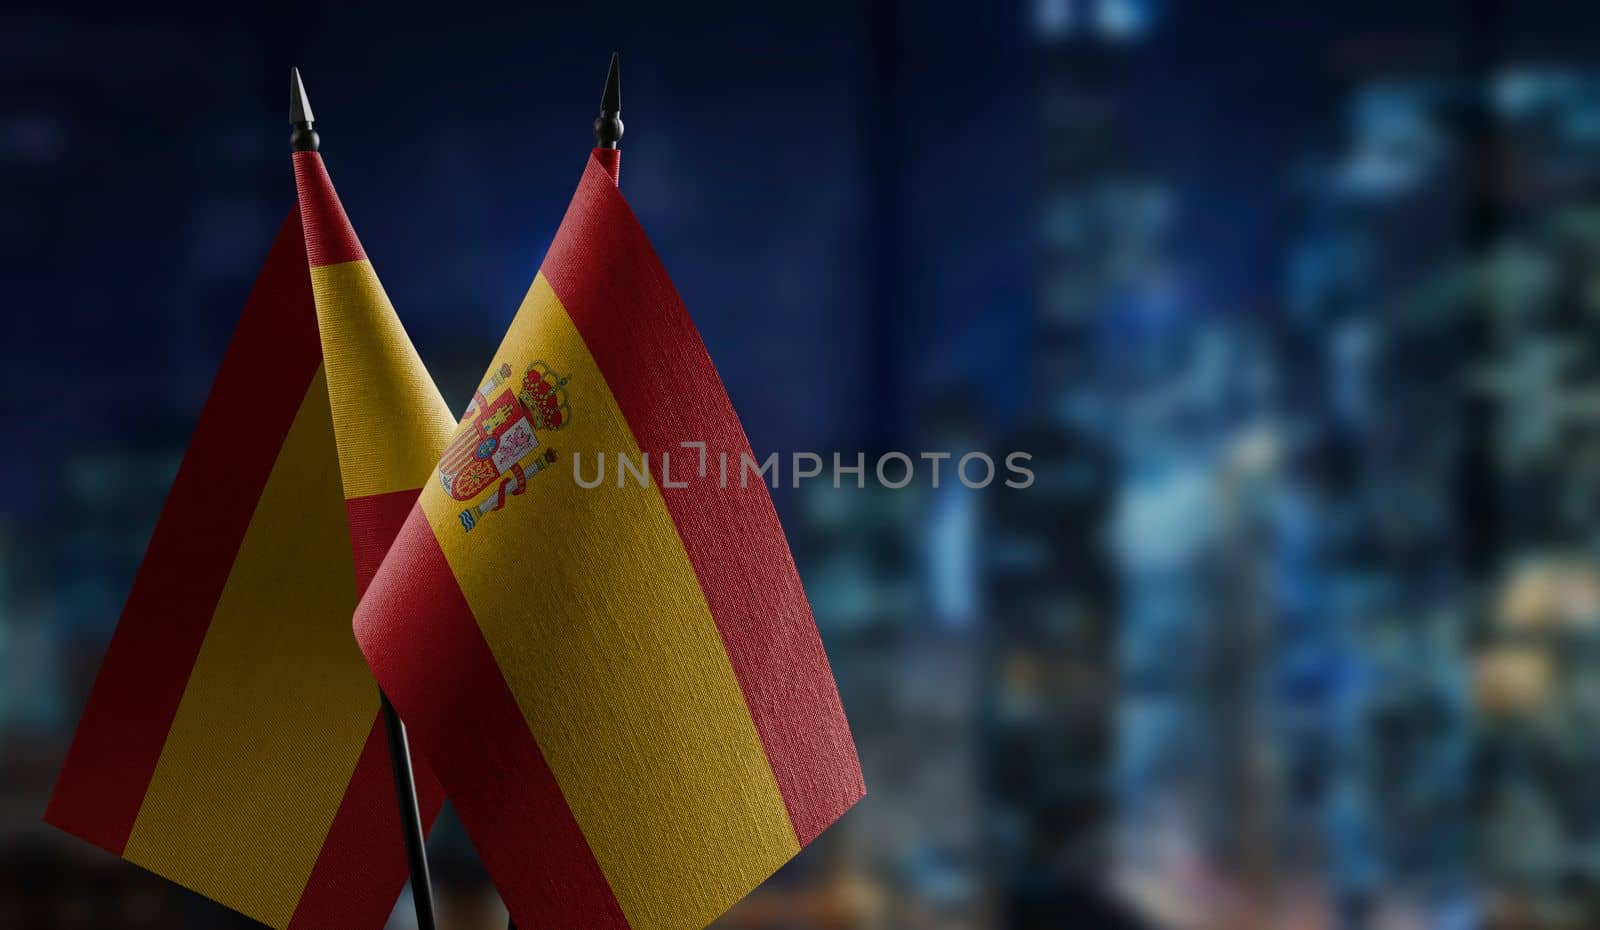 A small Spain flag on an abstract blurry background.